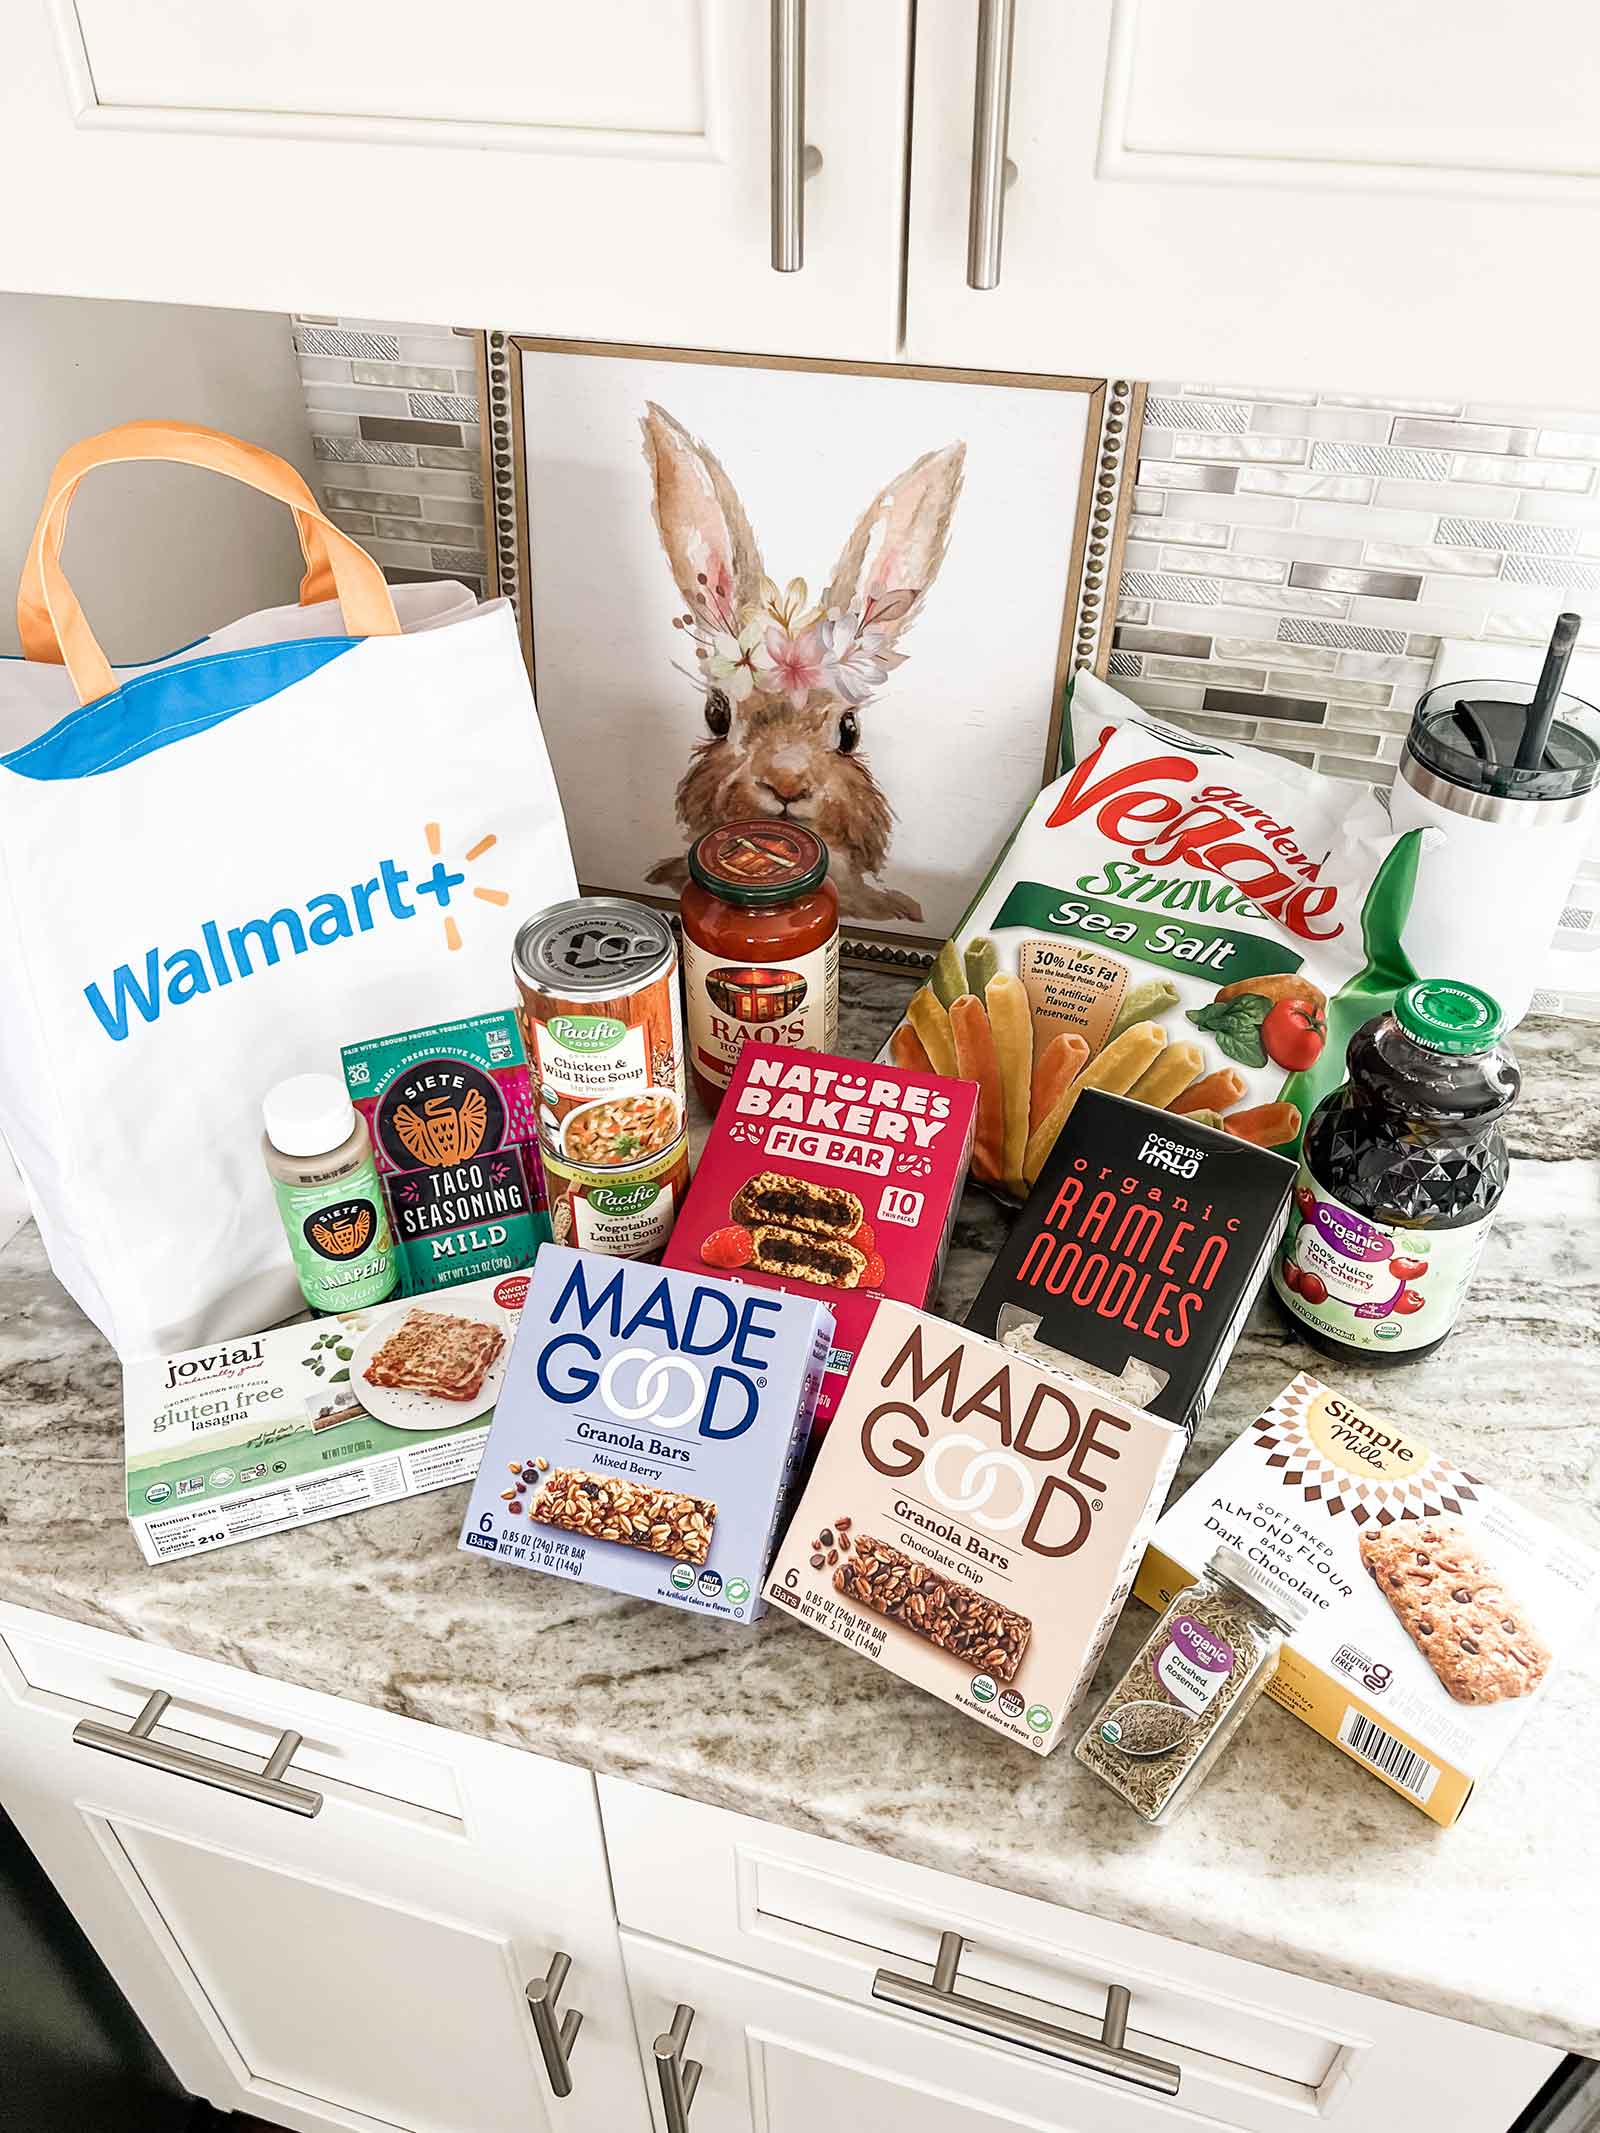 Walmart+ membership is totally worth it! Here are some of my favorite benefits and healthy foods I can get delivered with my membership.